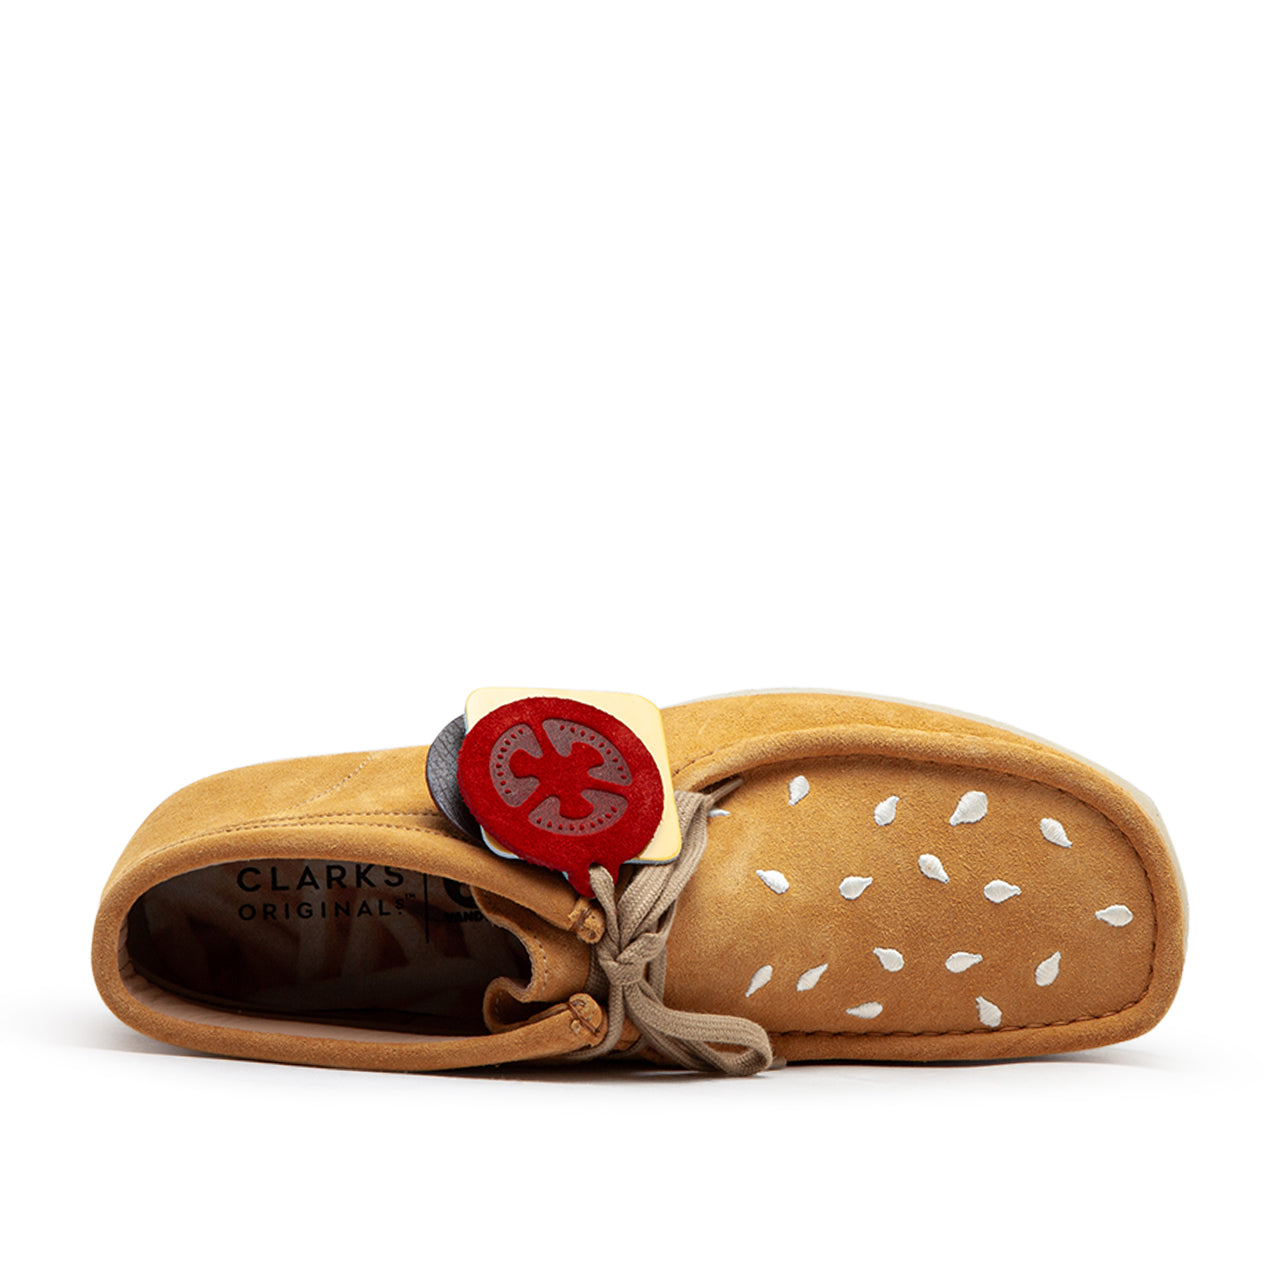 Vandy The Pink & Clarks Serve Up Hamburger-Inspired Wallabee Boot